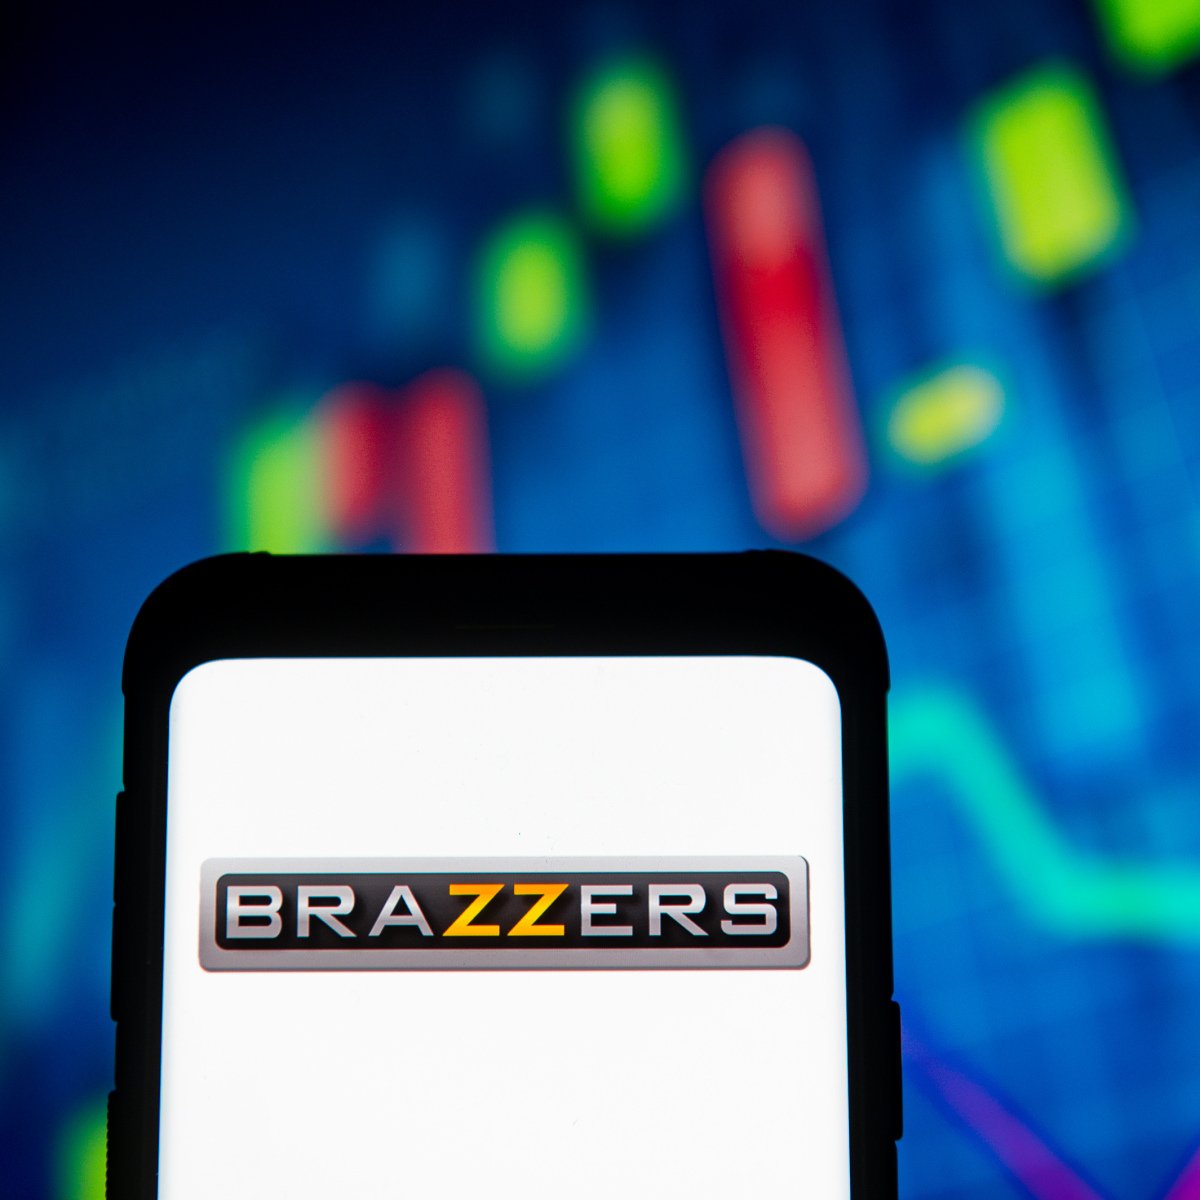 Best of Does brazzers have an app